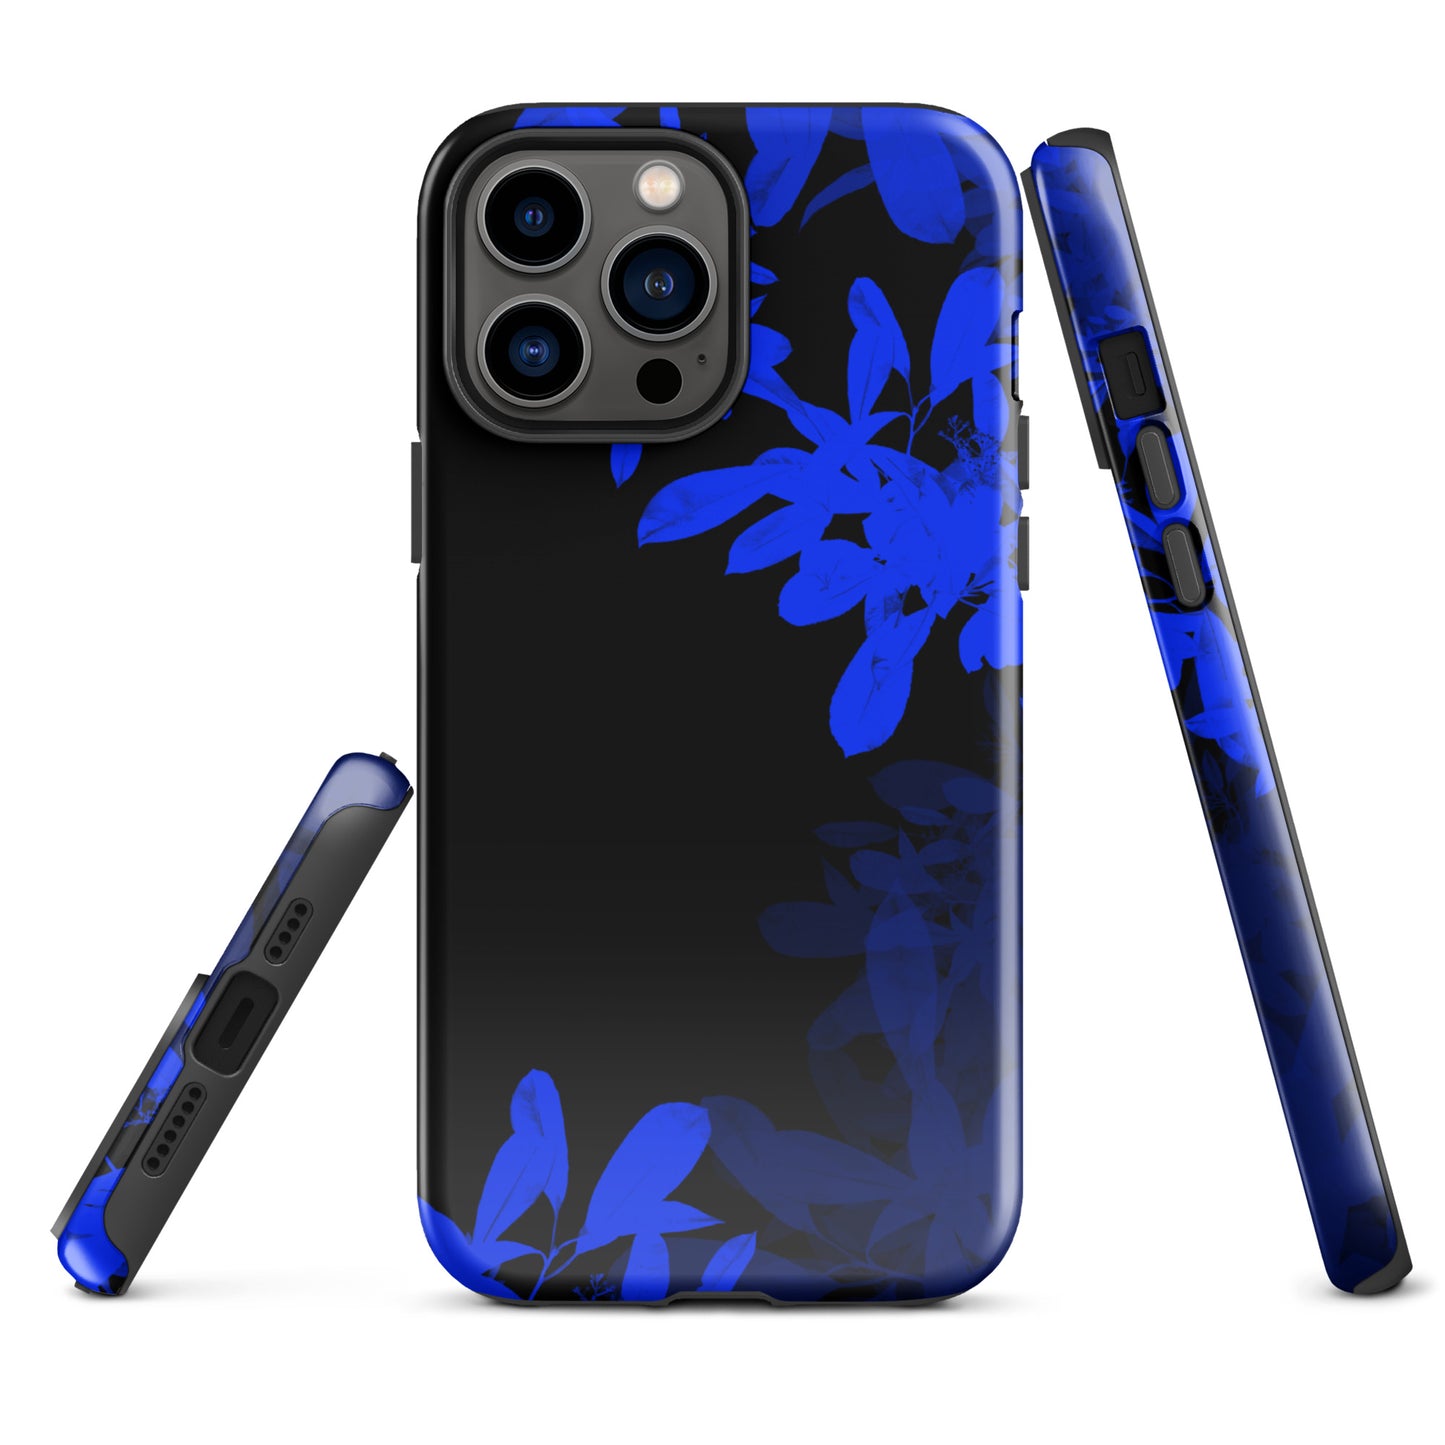 A Night Blue Plant Case for the iPhone 13 Pro Max